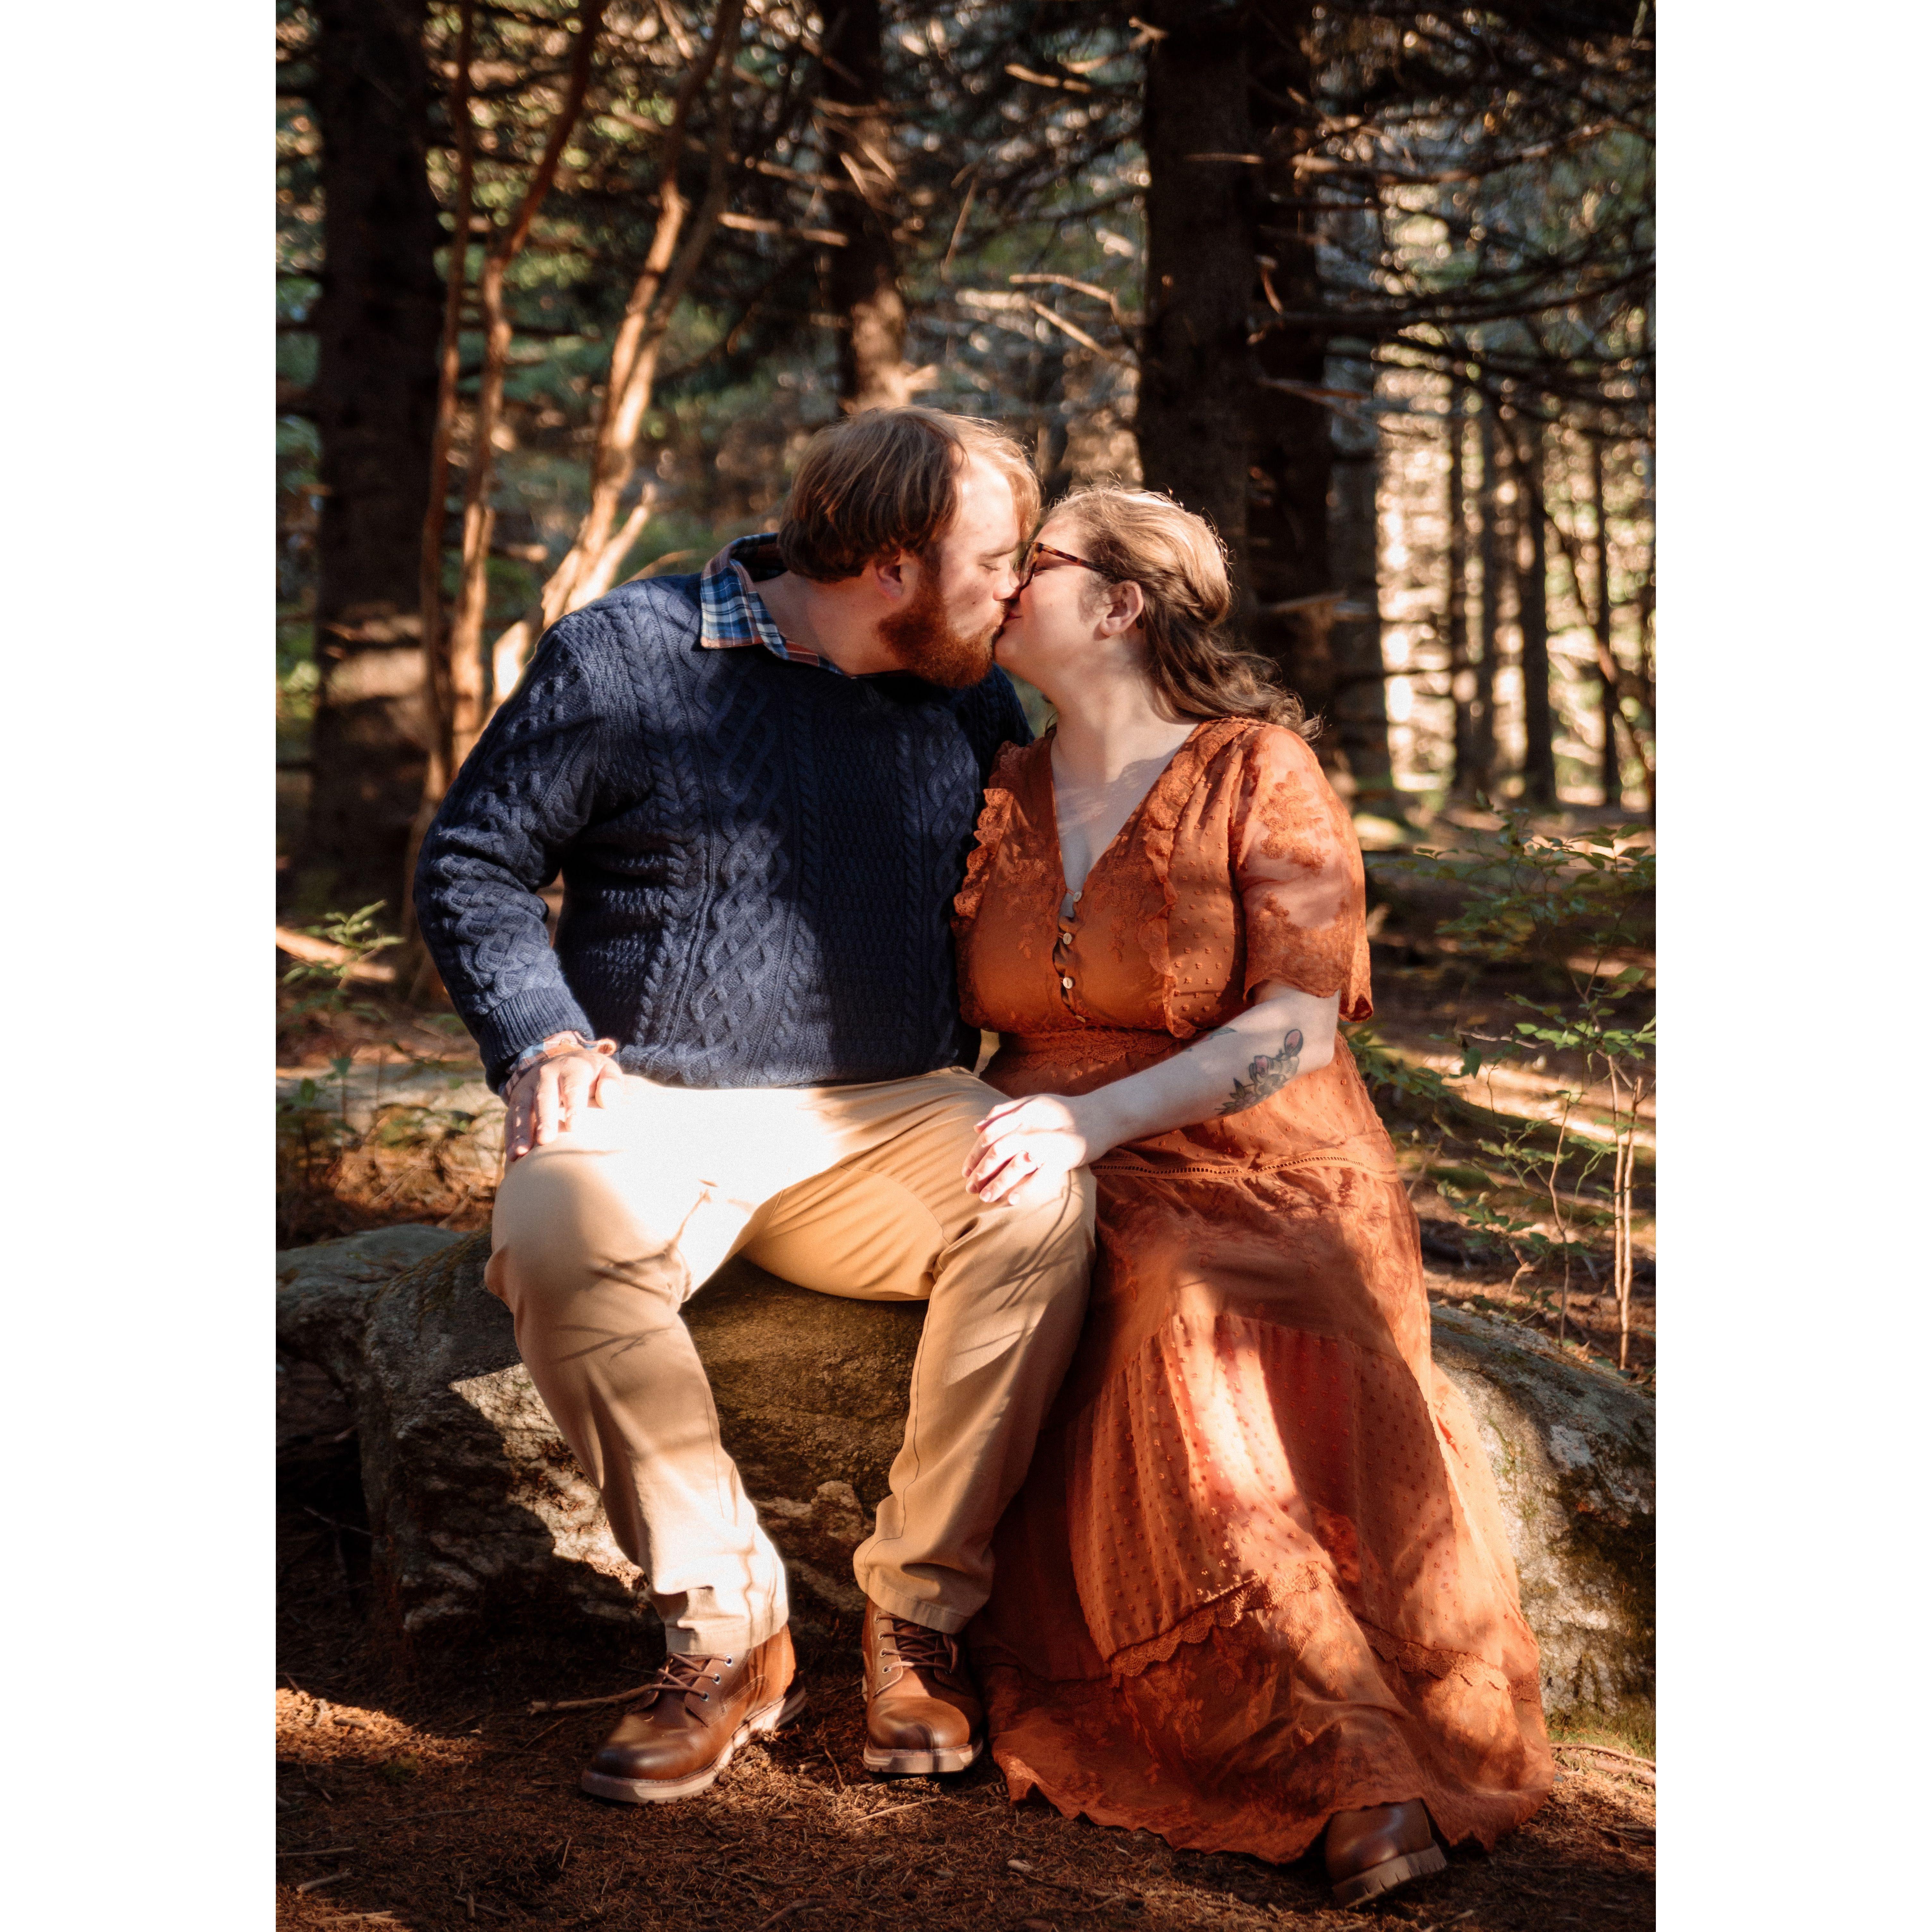 One of our favorite engagement photos in Black Balsam Knob, courtesy of our wonderful photographer, Simon Bonneau of Grand Jour Photography!